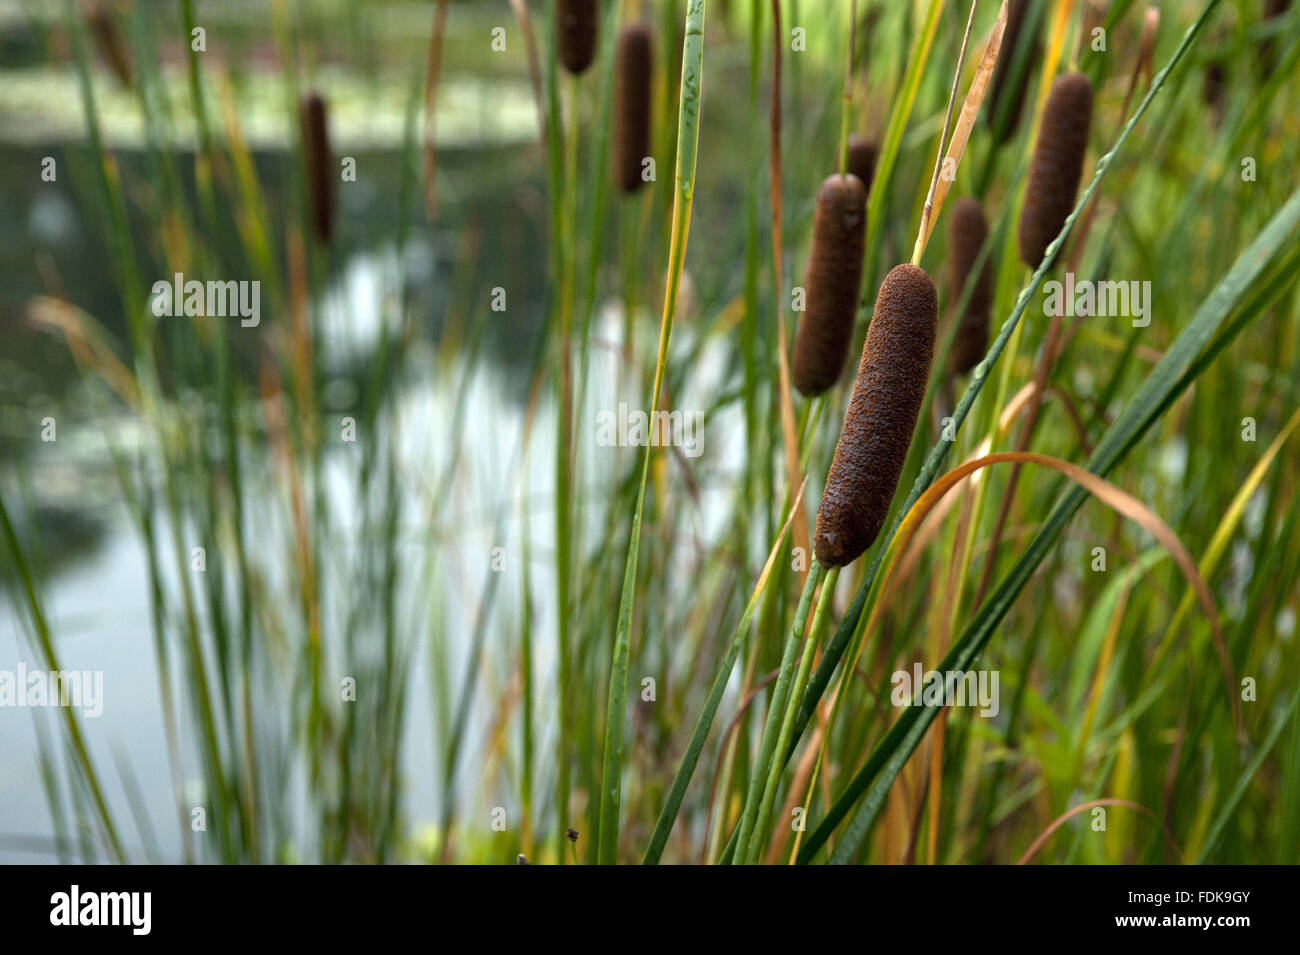 Bulrushes in the garden at Bateman's, East Sussex. Stock Photo